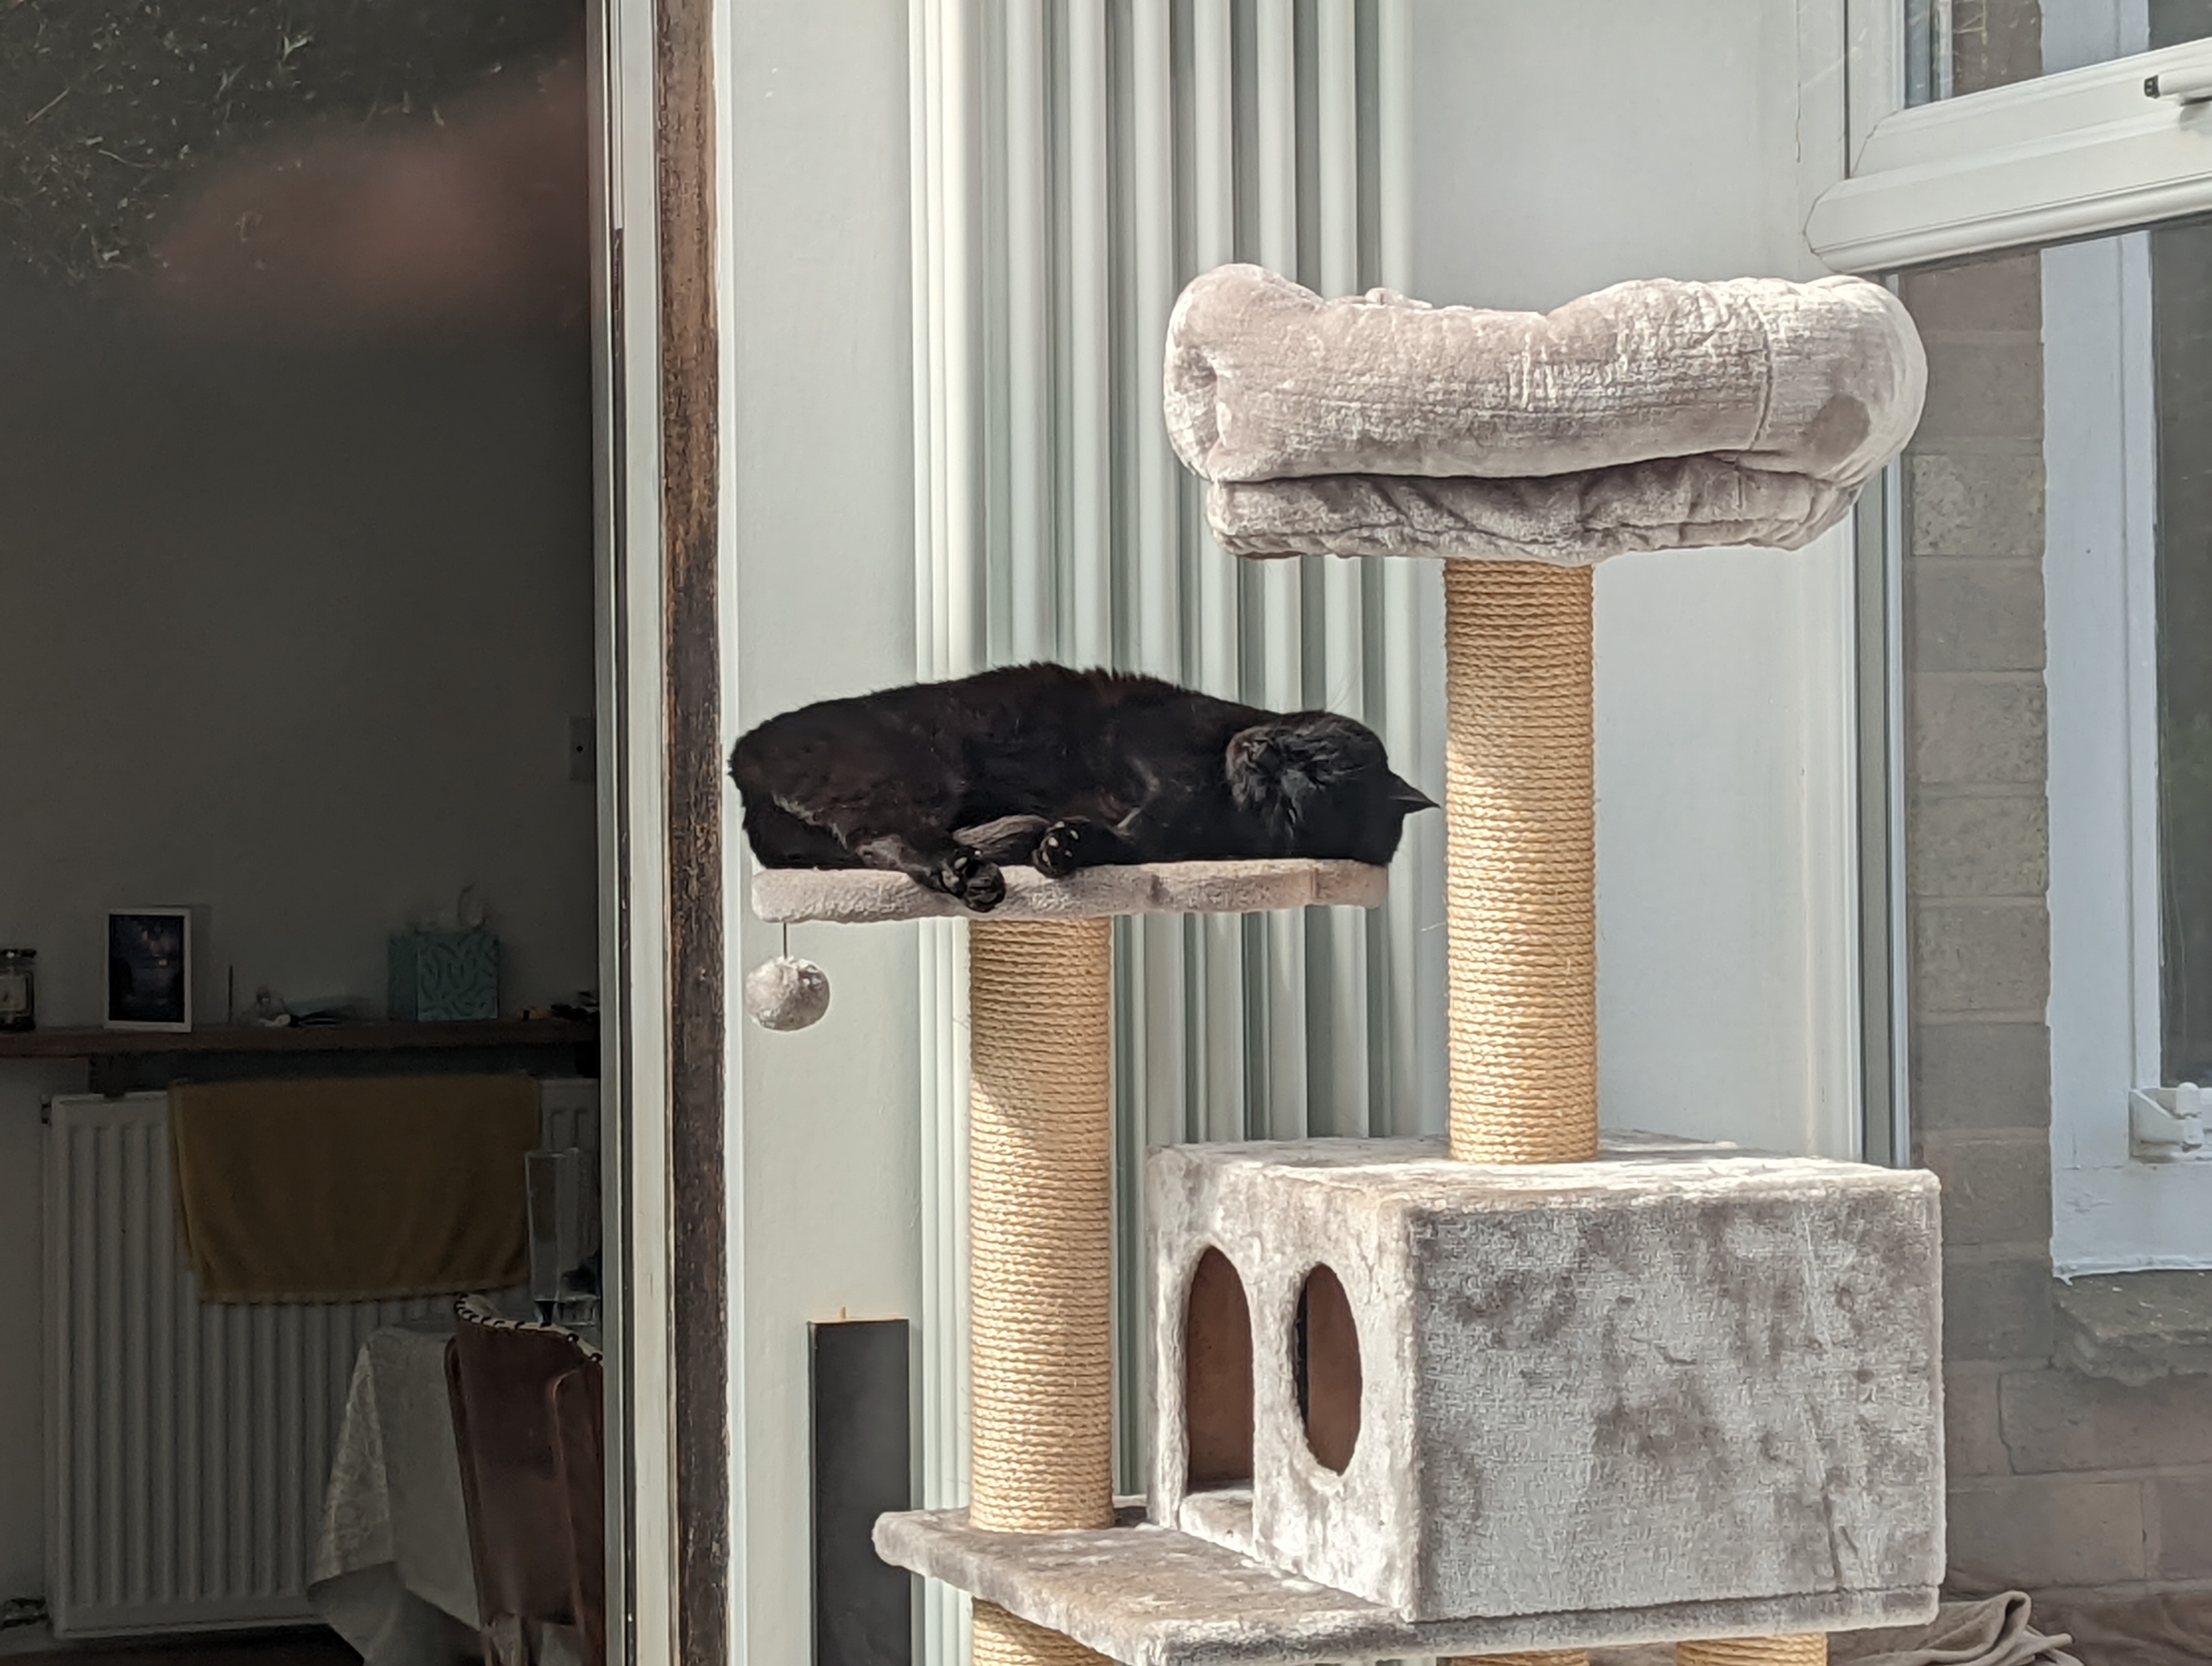 Black cat sleeping on his tower, flopped over on his side, in a sunny conservatory